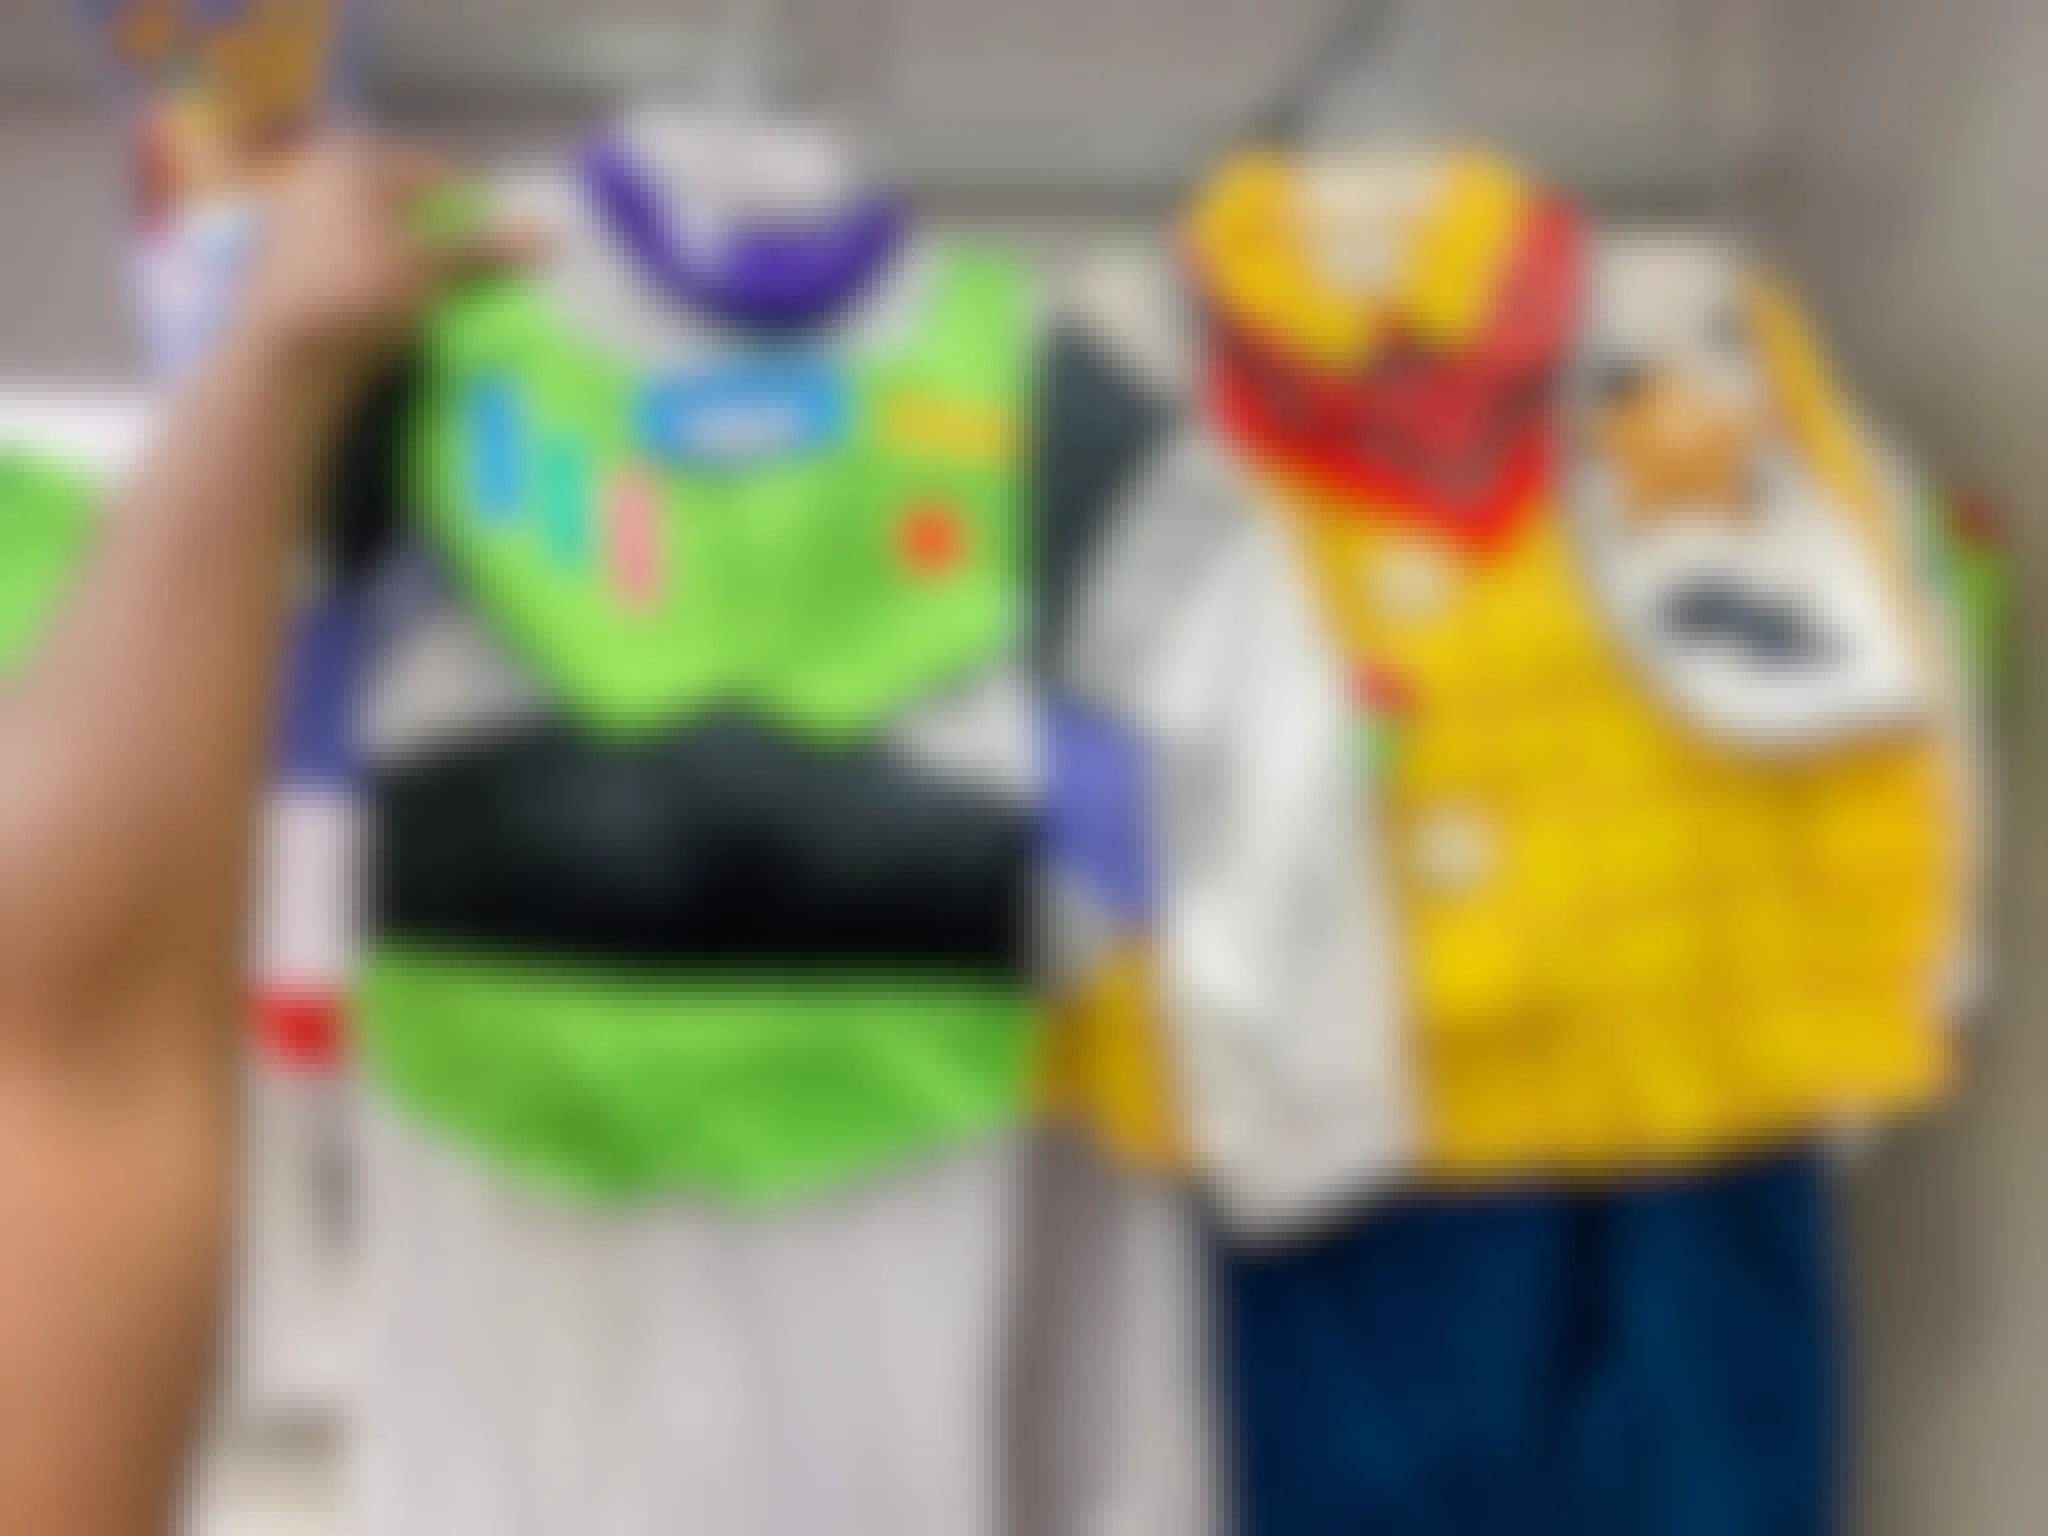 A person's hand holding up a Buzz Lightyear costume next to a Woody costume.